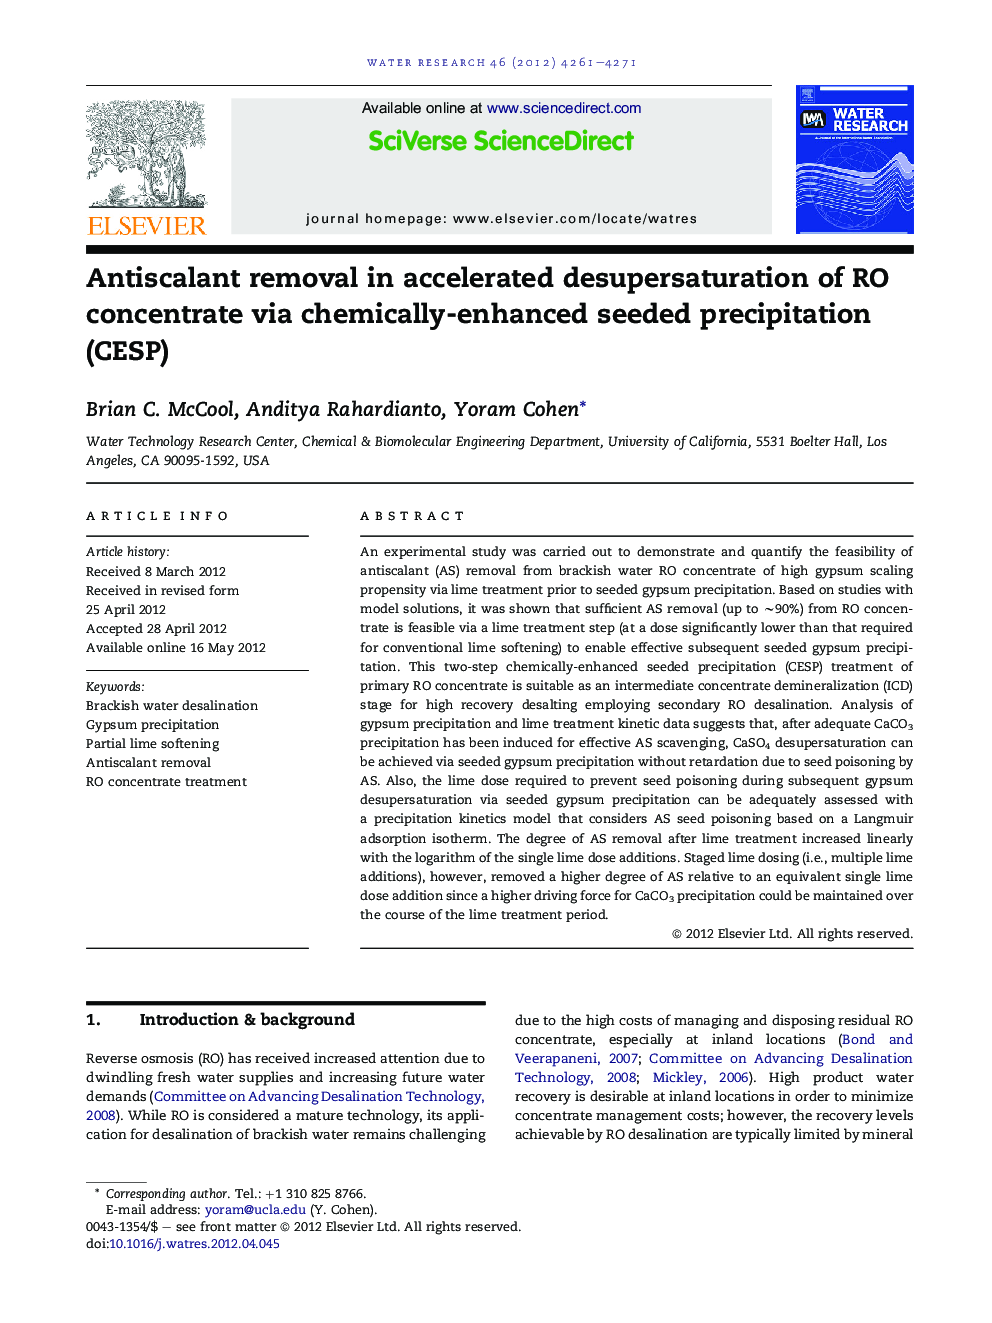 Antiscalant removal in accelerated desupersaturation of RO concentrate via chemically-enhanced seeded precipitation (CESP)